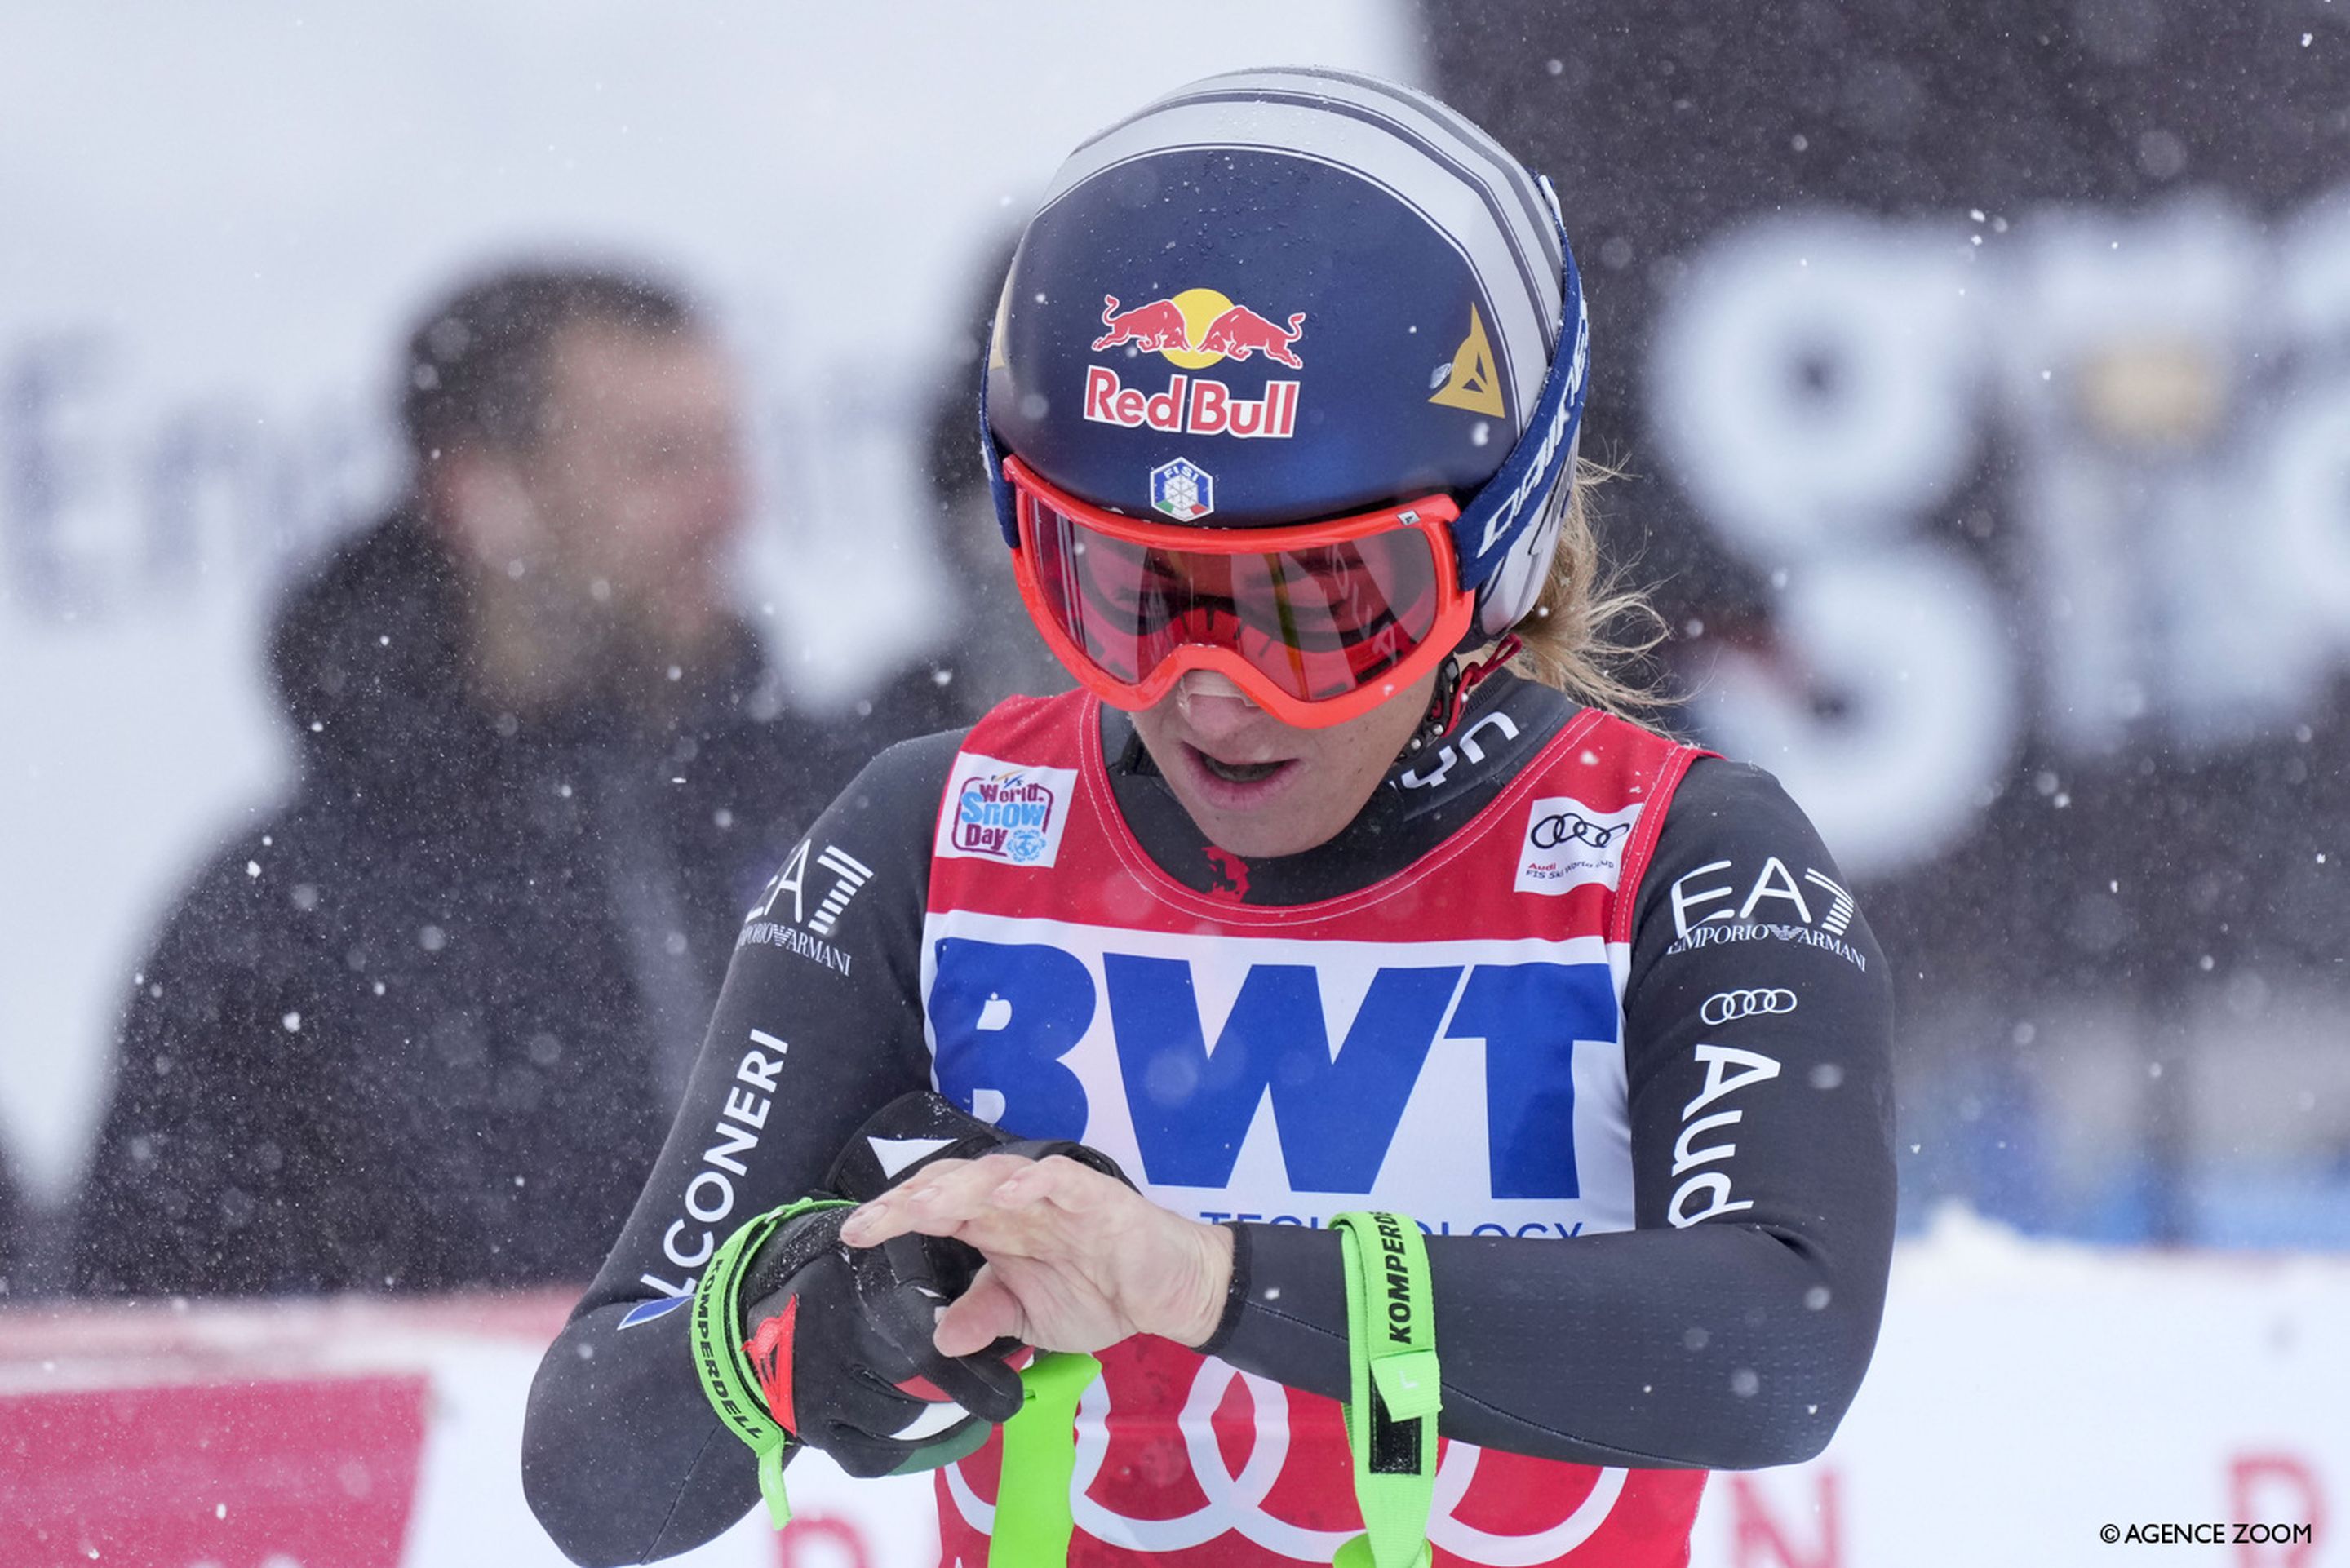 Soffia Goggia surveys the damage to her hand after finishing second in the St. Moritz downhill (Agence Zoom)